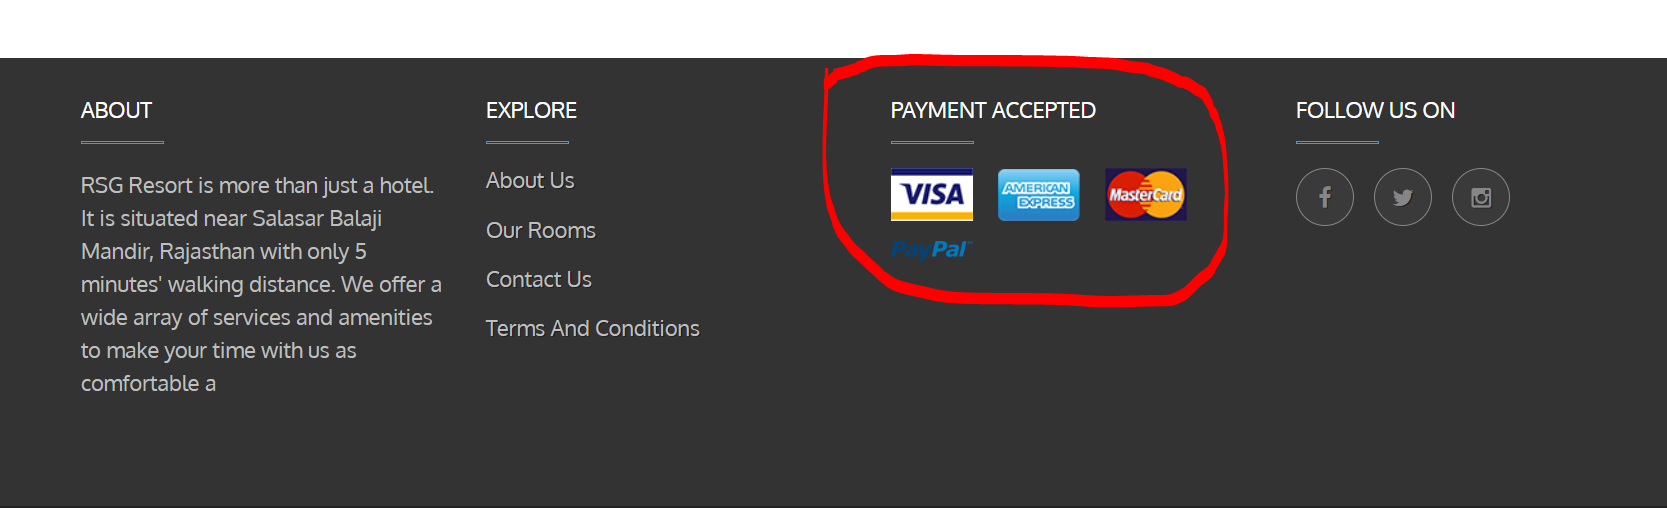 payment accepted.PNG